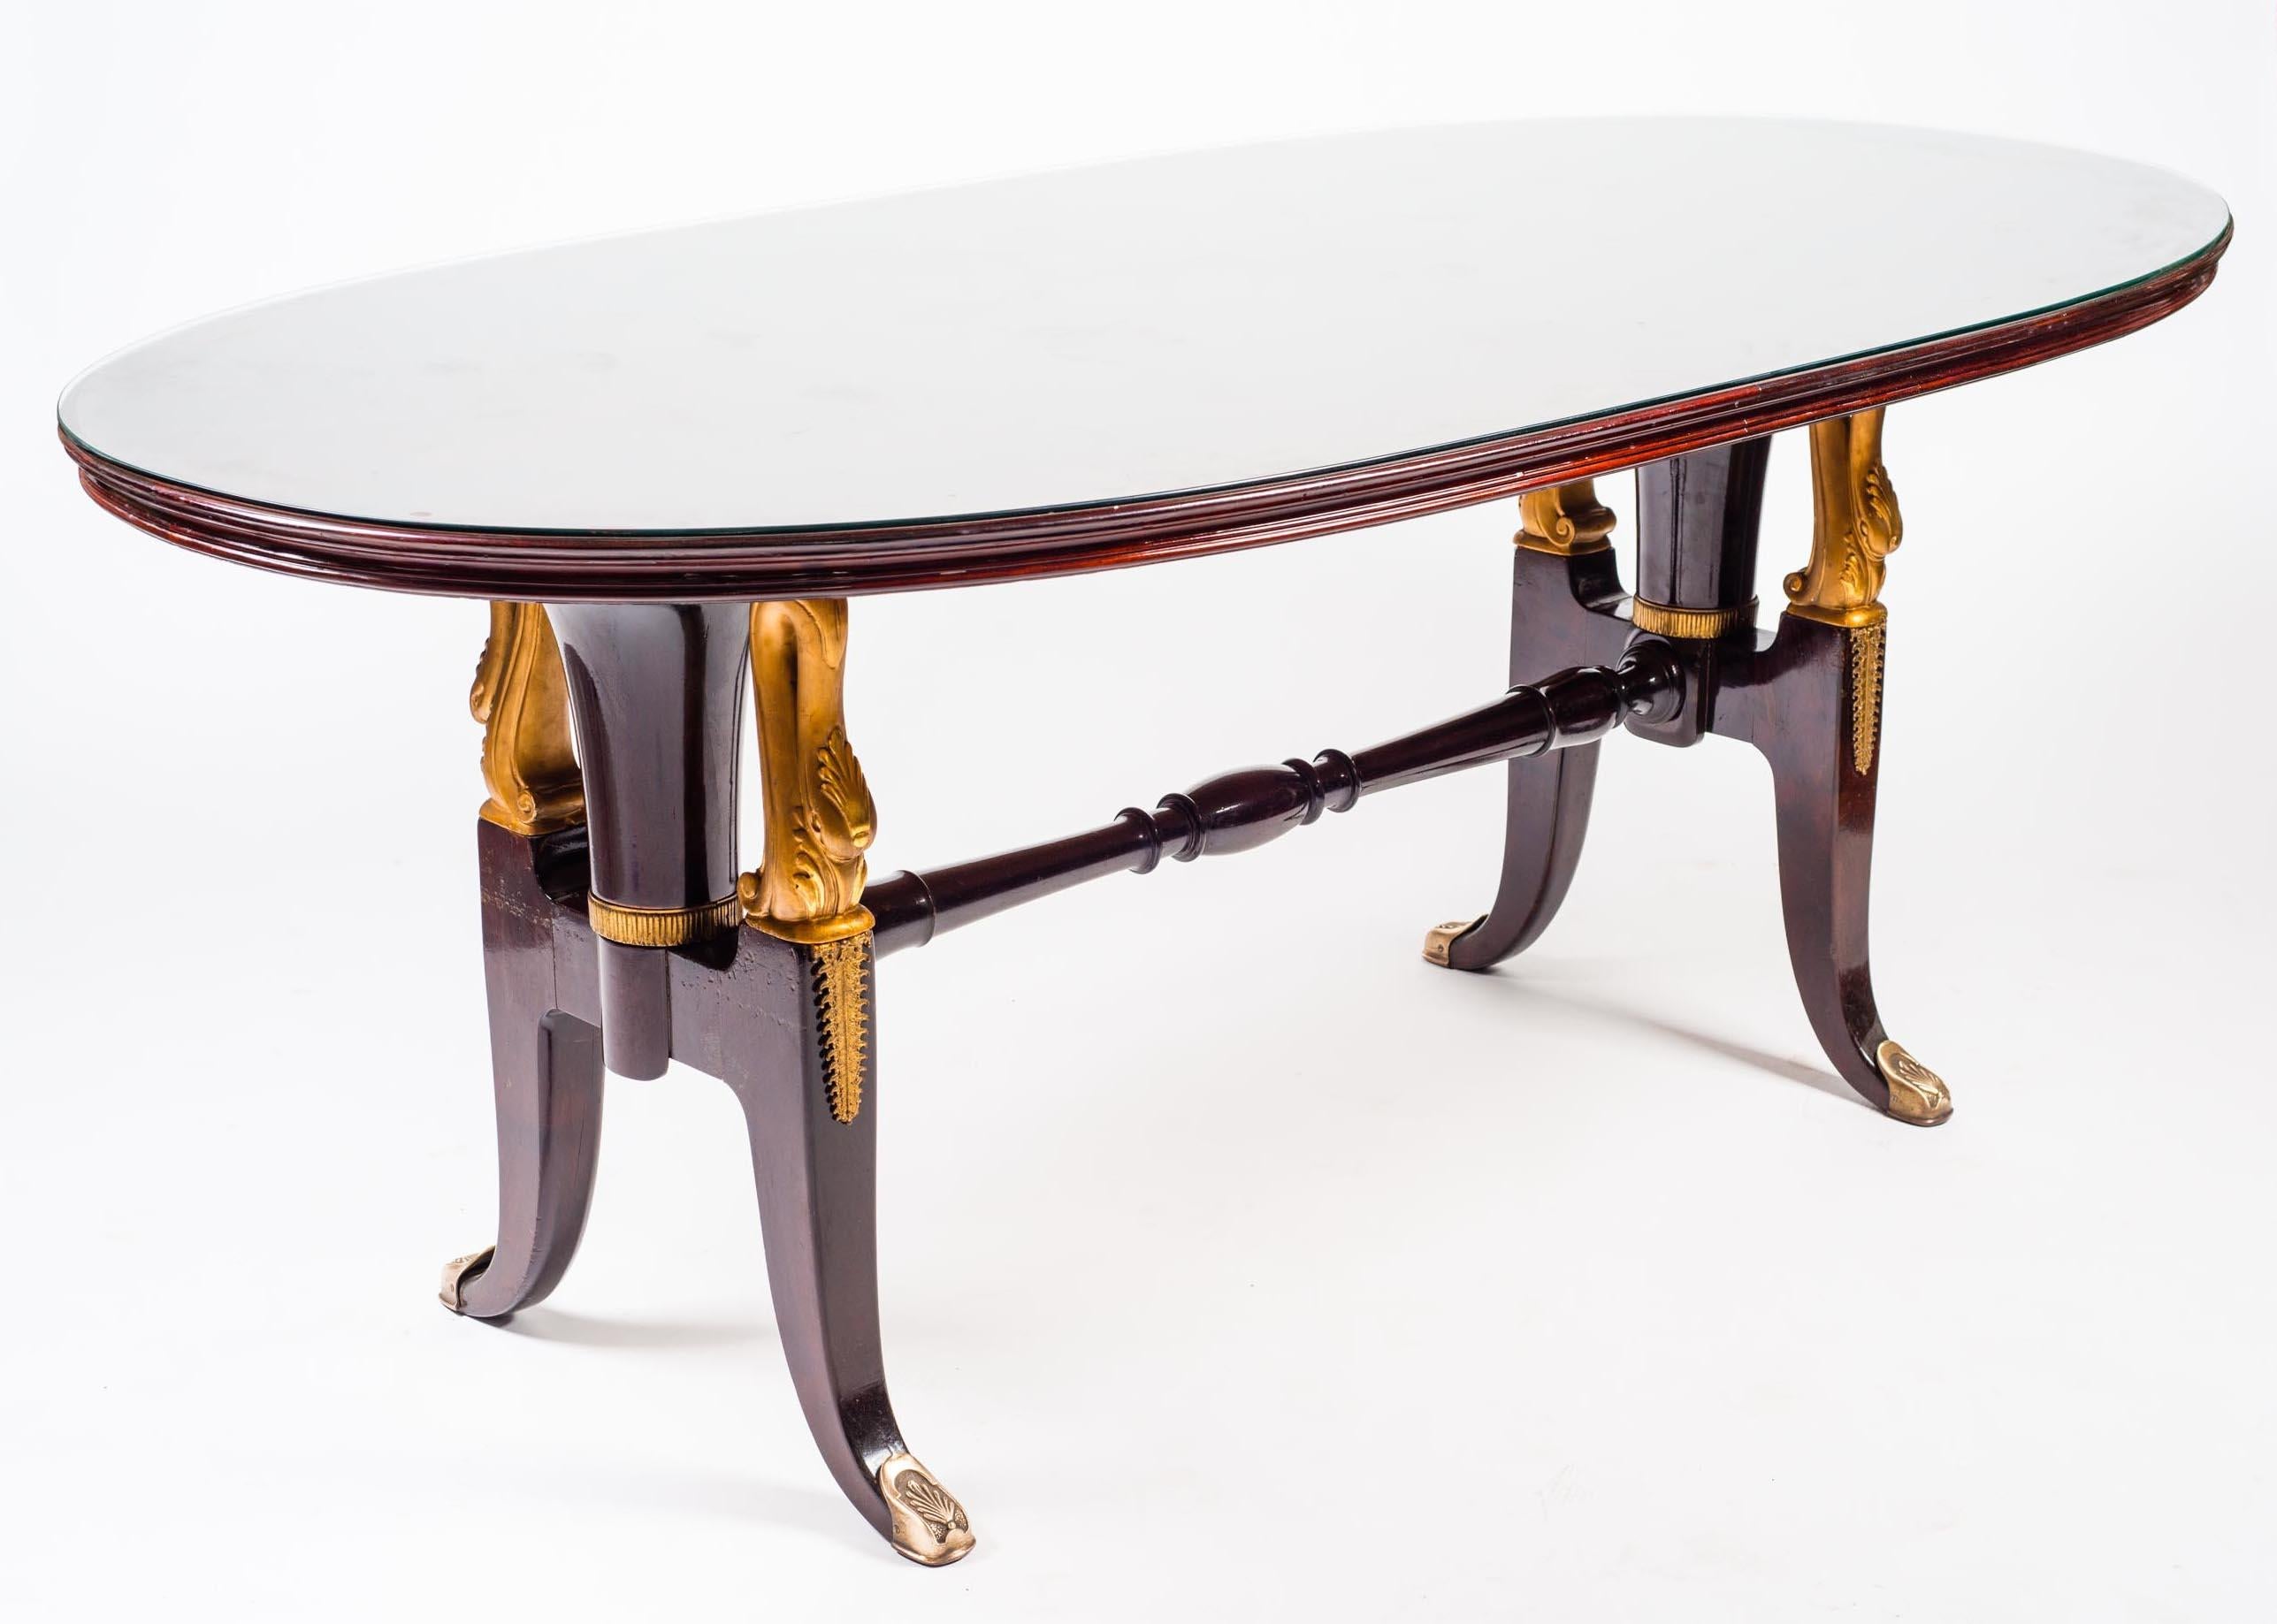 Midcentury Italian Mahogany Table in the Style of Paolo Buffa, 1950s For Sale 11